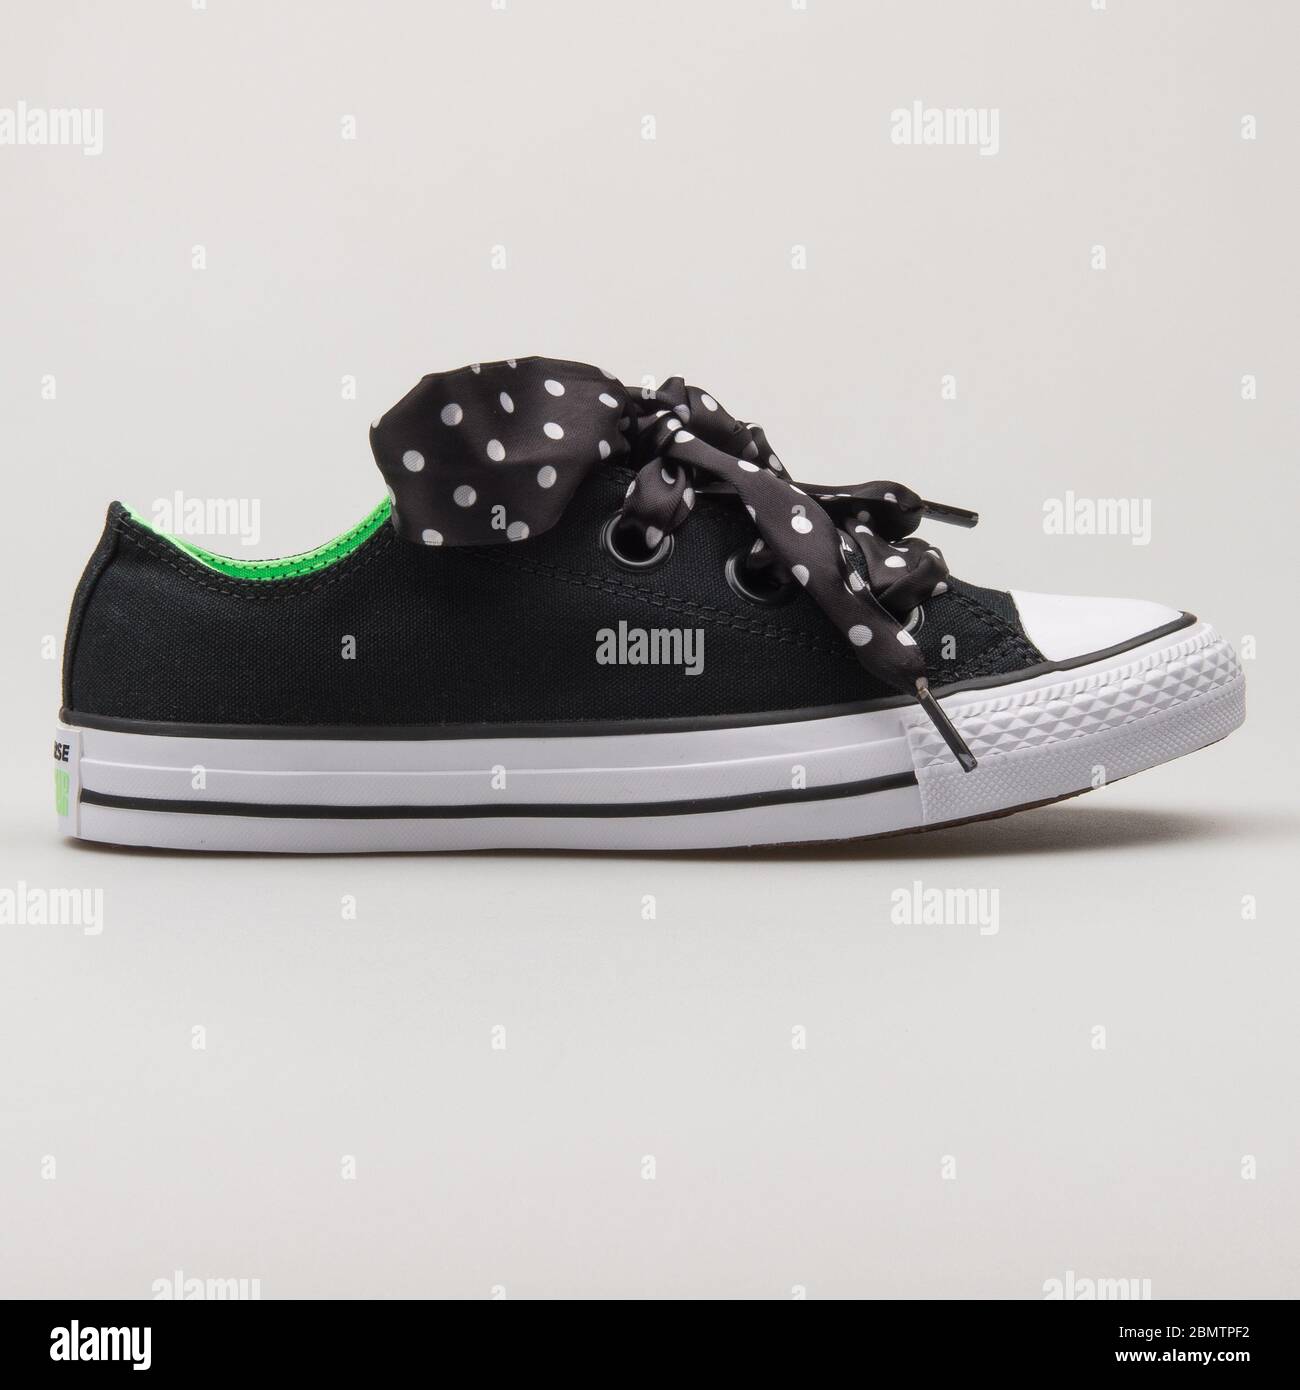 VIENNA, AUSTRIA - FEBRUARY 19, 2018: Converse Chuck Taylor All Star Big Eyelets OX black, green and white sneaker on white background. Stock Photo